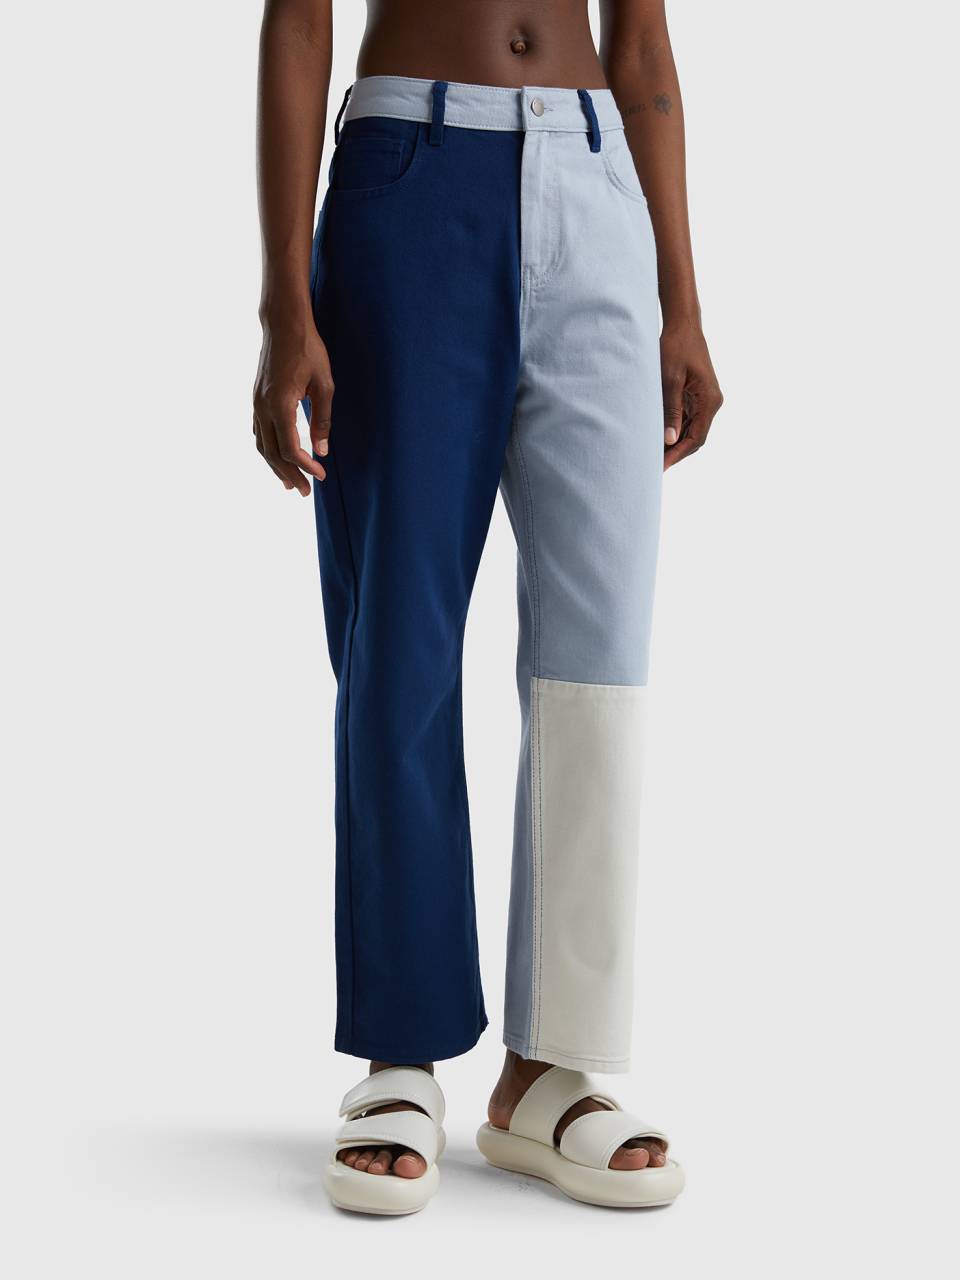 Benetton cropped color block trousers. 1